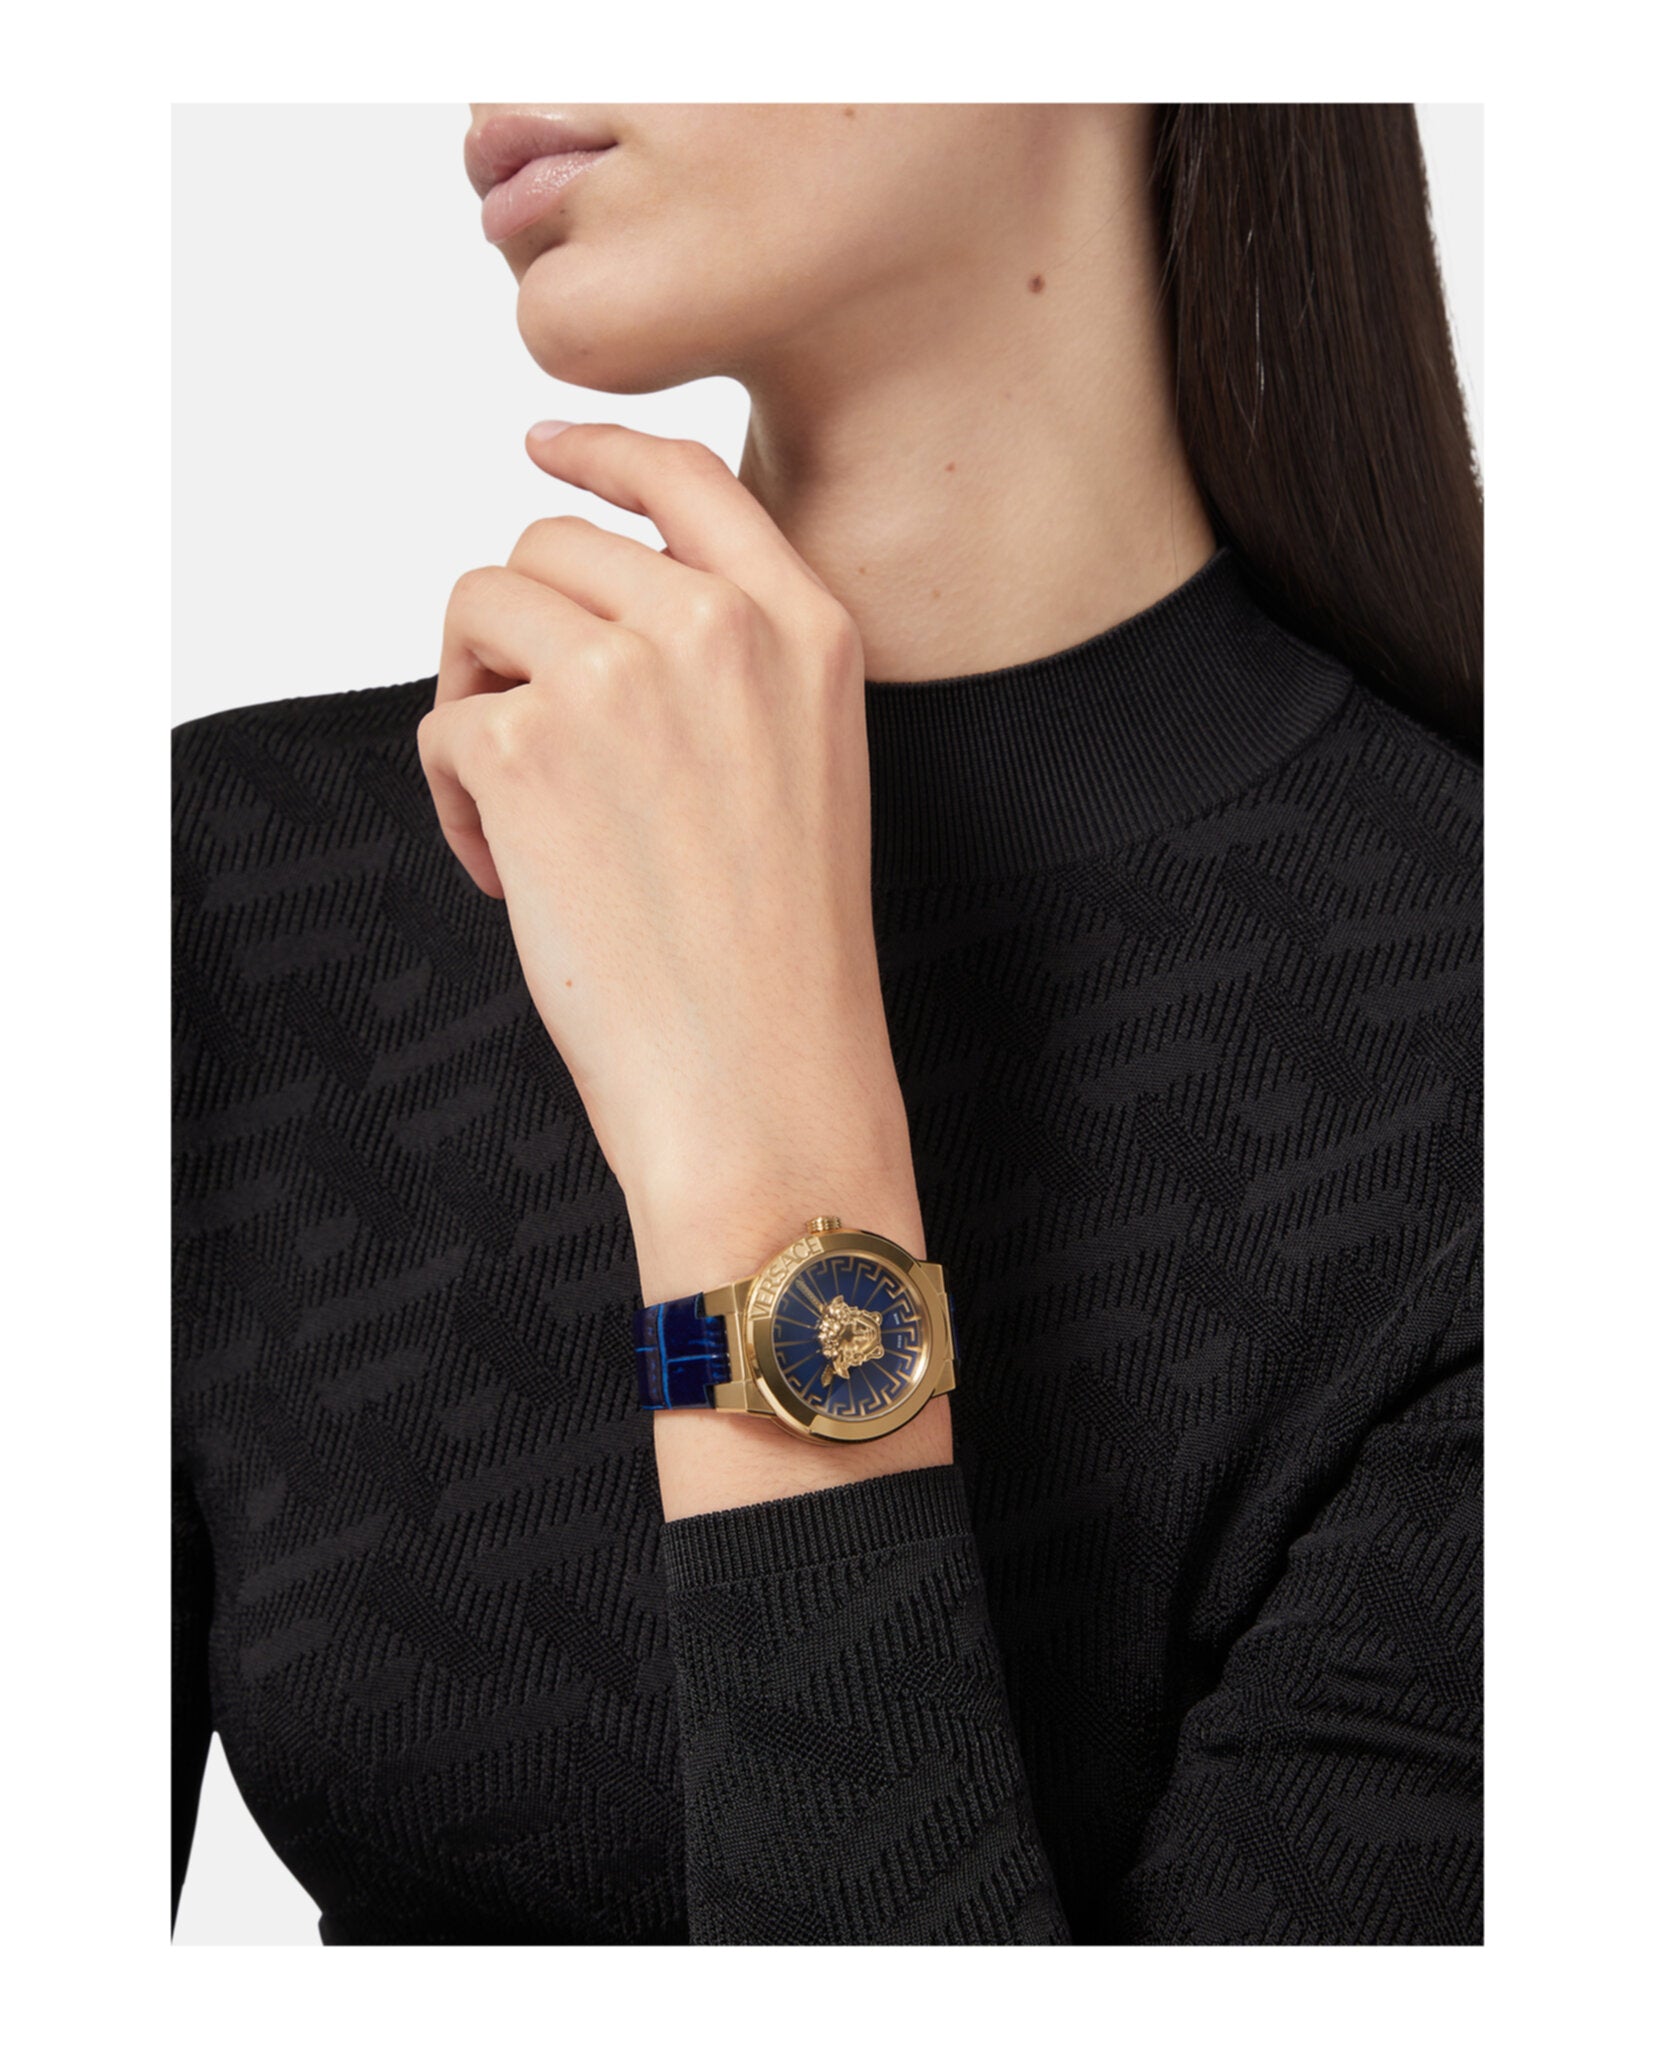 Versace Womens Medusa Infinite Watches | MadaLuxe Time – Madaluxe Time